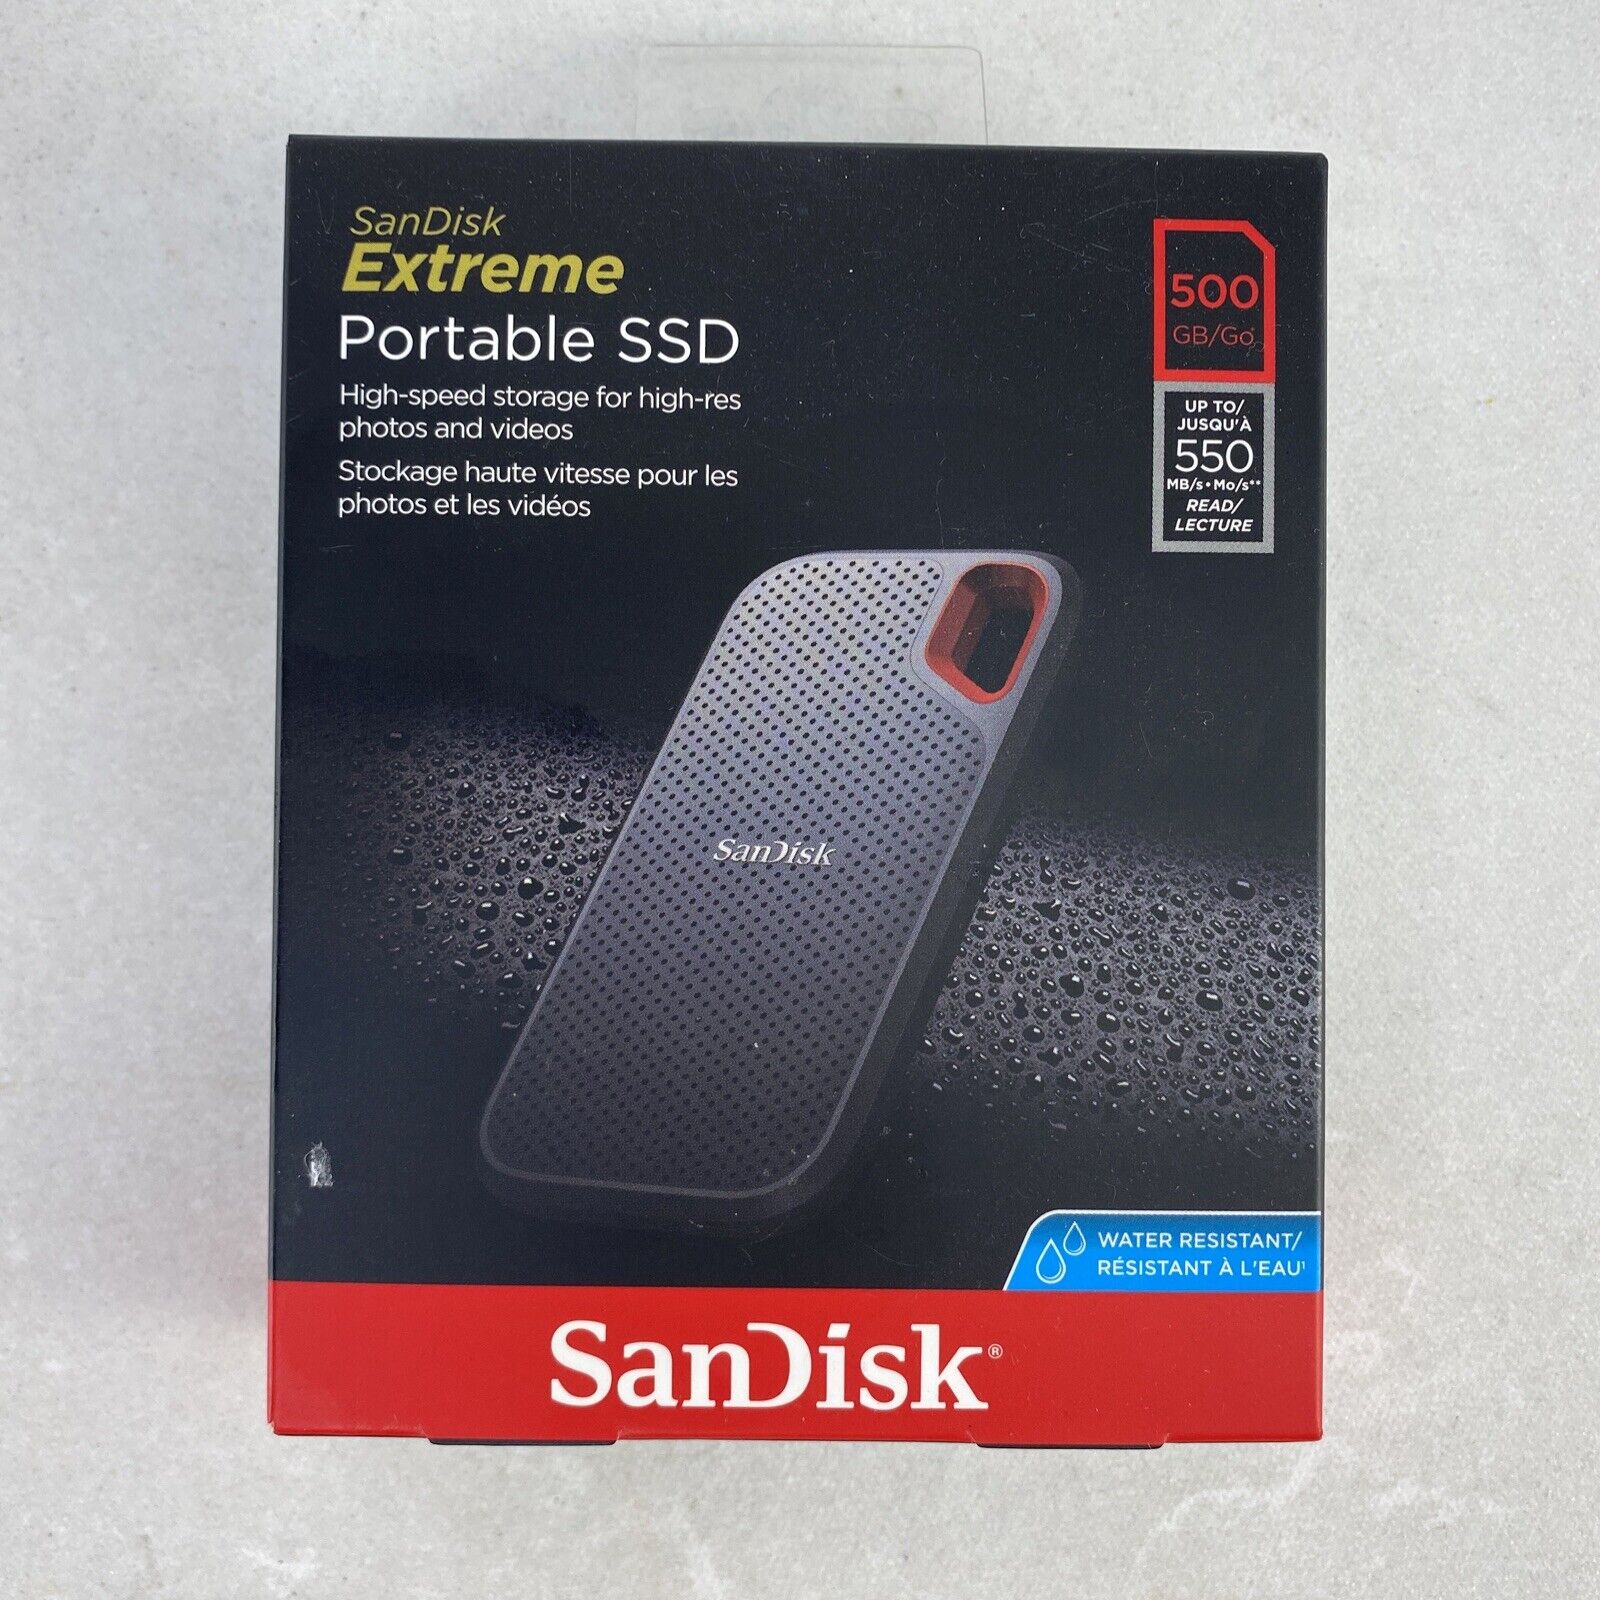 SanDisk Extreme Portable SSD 500gb External Hard Drive BRAND NEW and SEALED